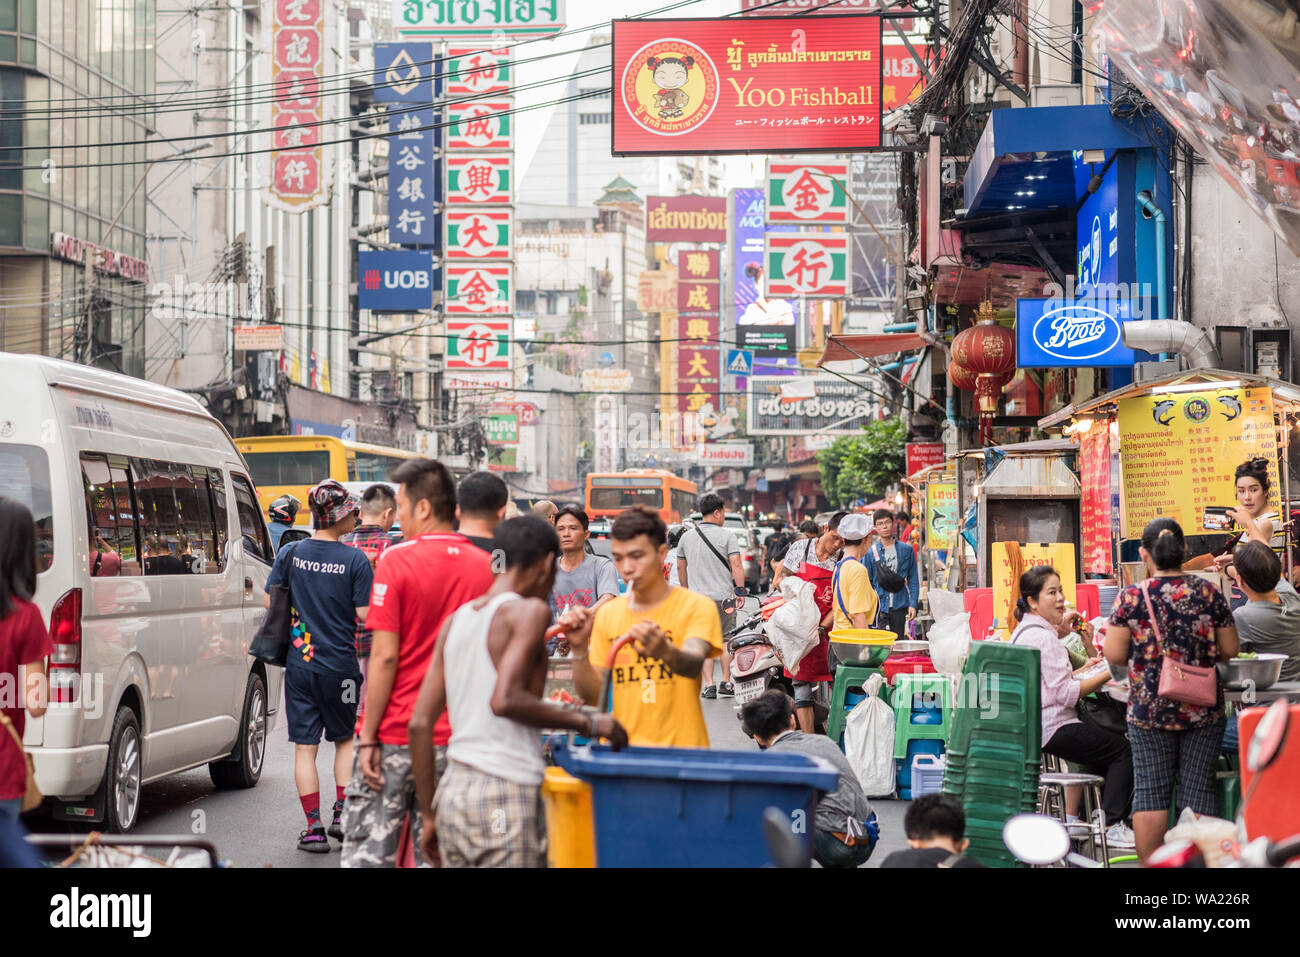 Bangkok, Thailand - June 5, 2019: a diverse crowd in Yaowarat Road, the main street of Chinatown, known as one of the top destinations of the city. Stock Photo